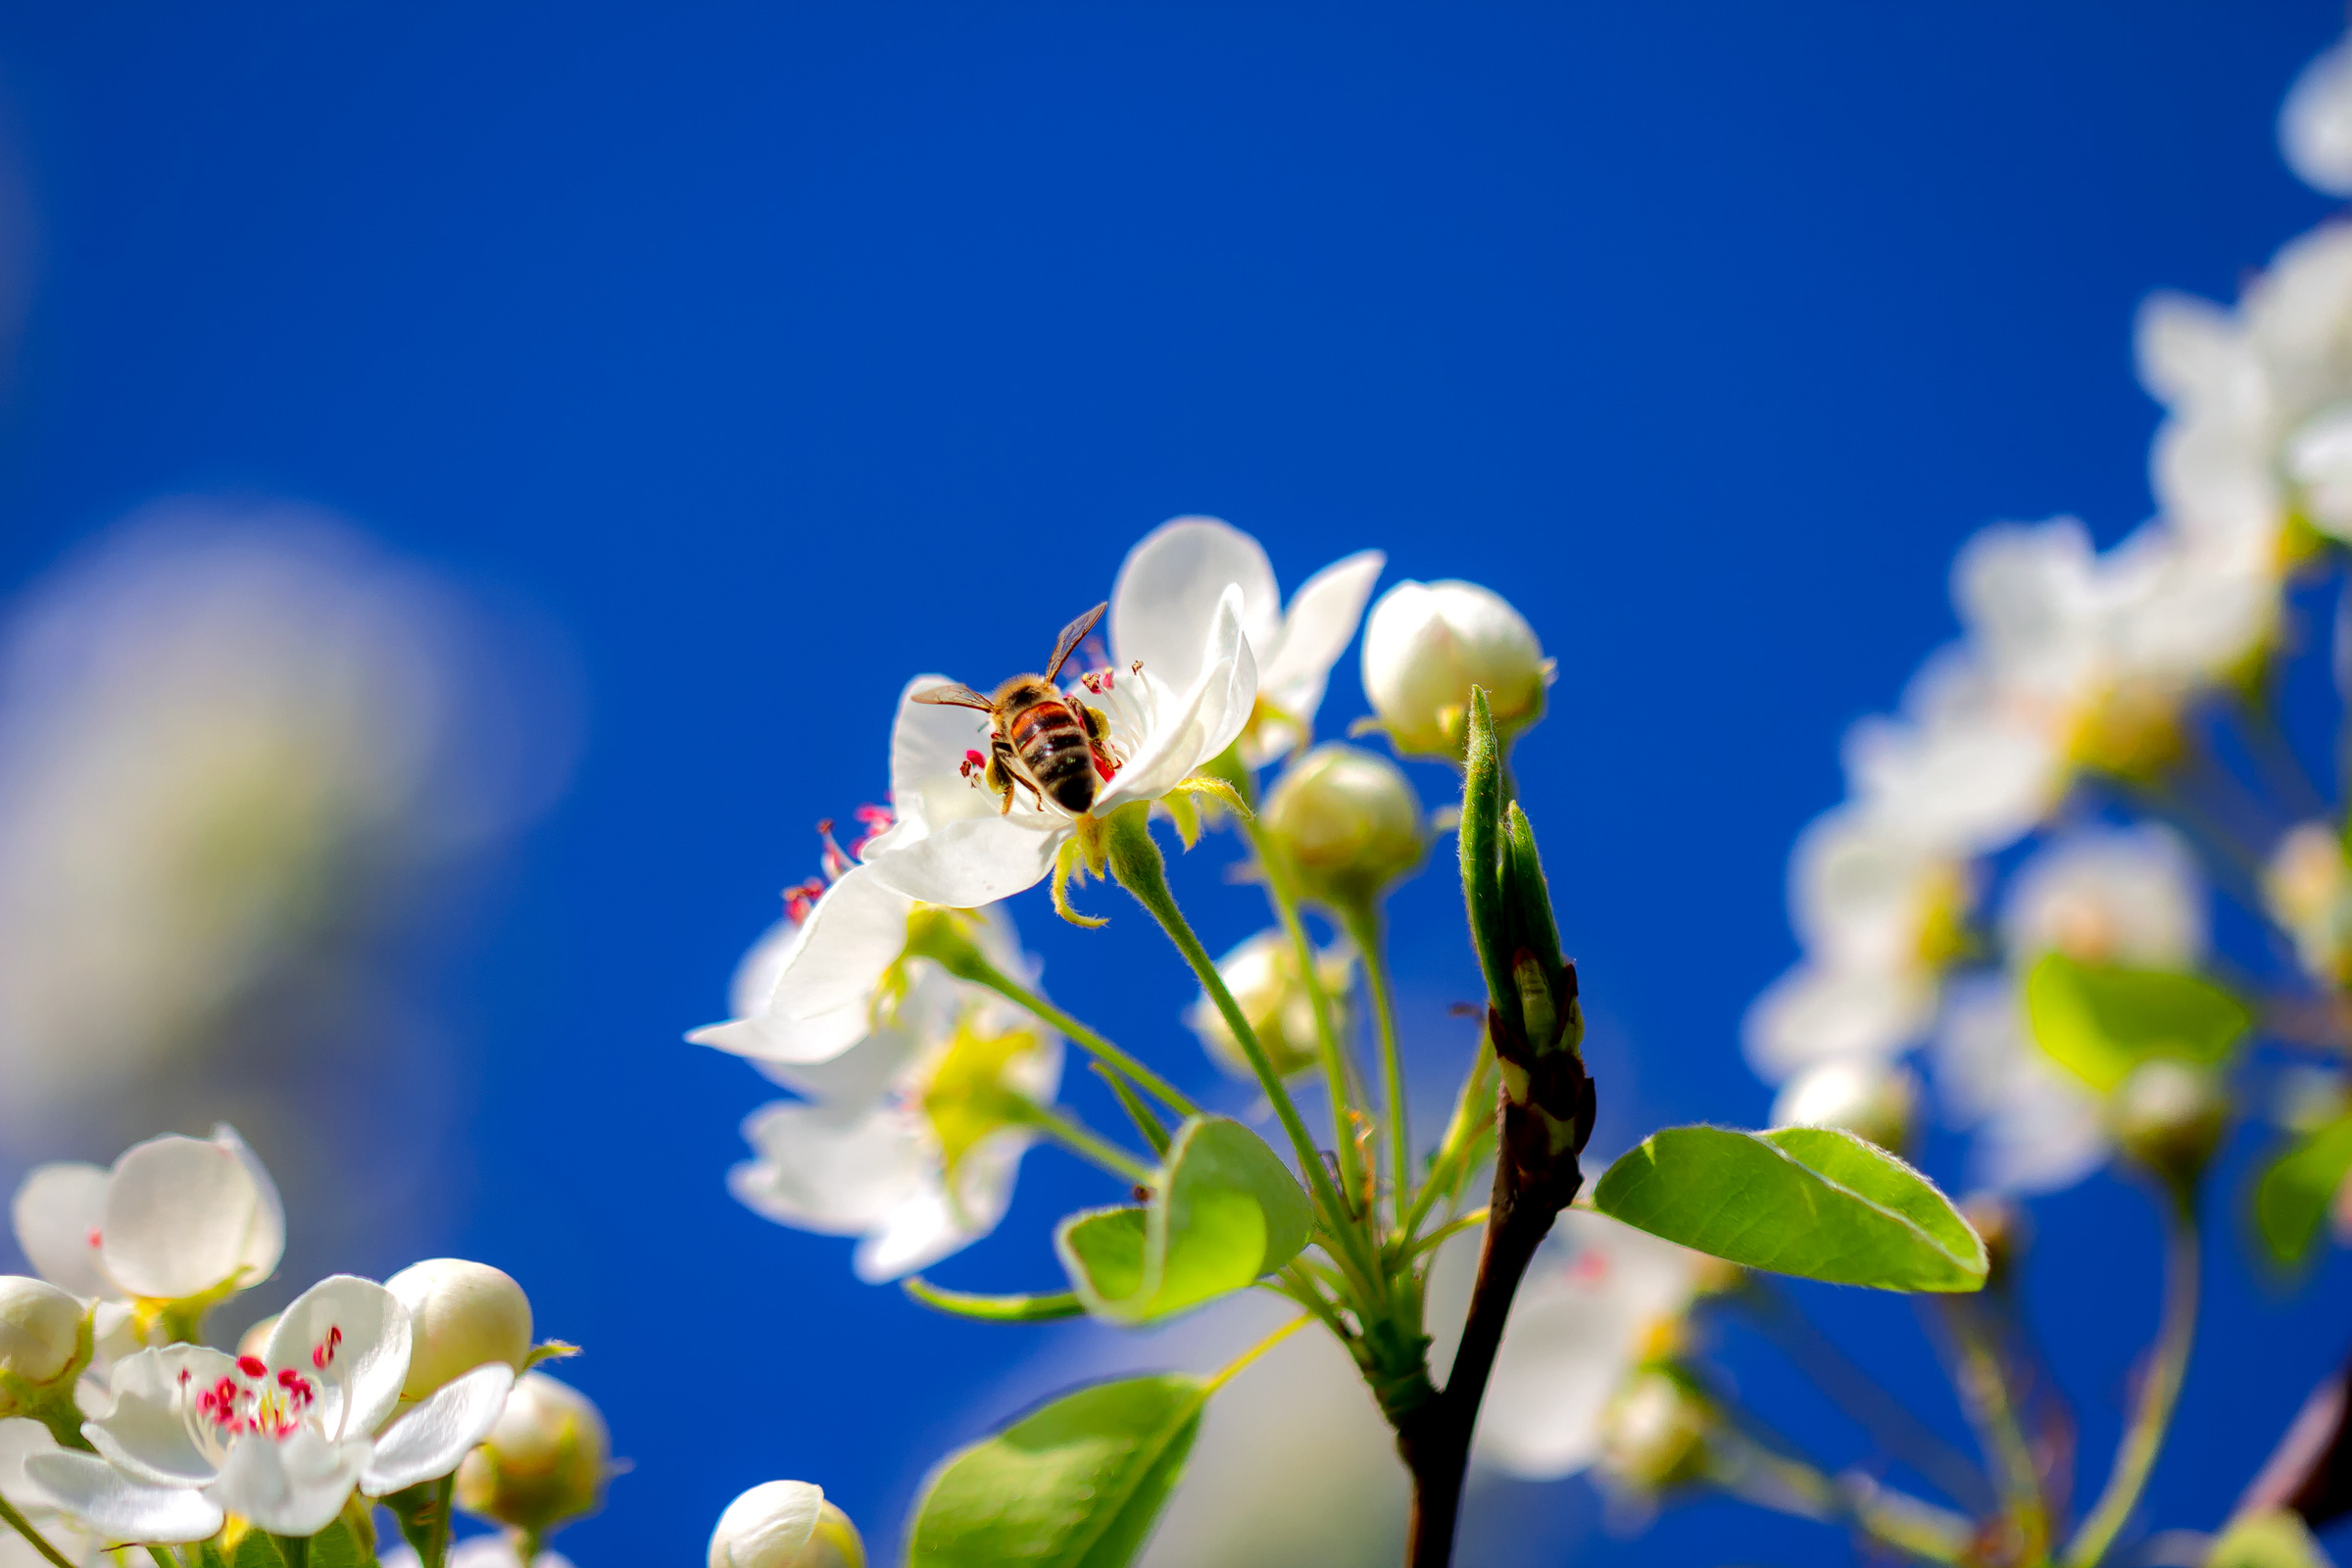 Flowering branch and a bee on a apple flower with blurred background of a spring garden and a blue sky close-up